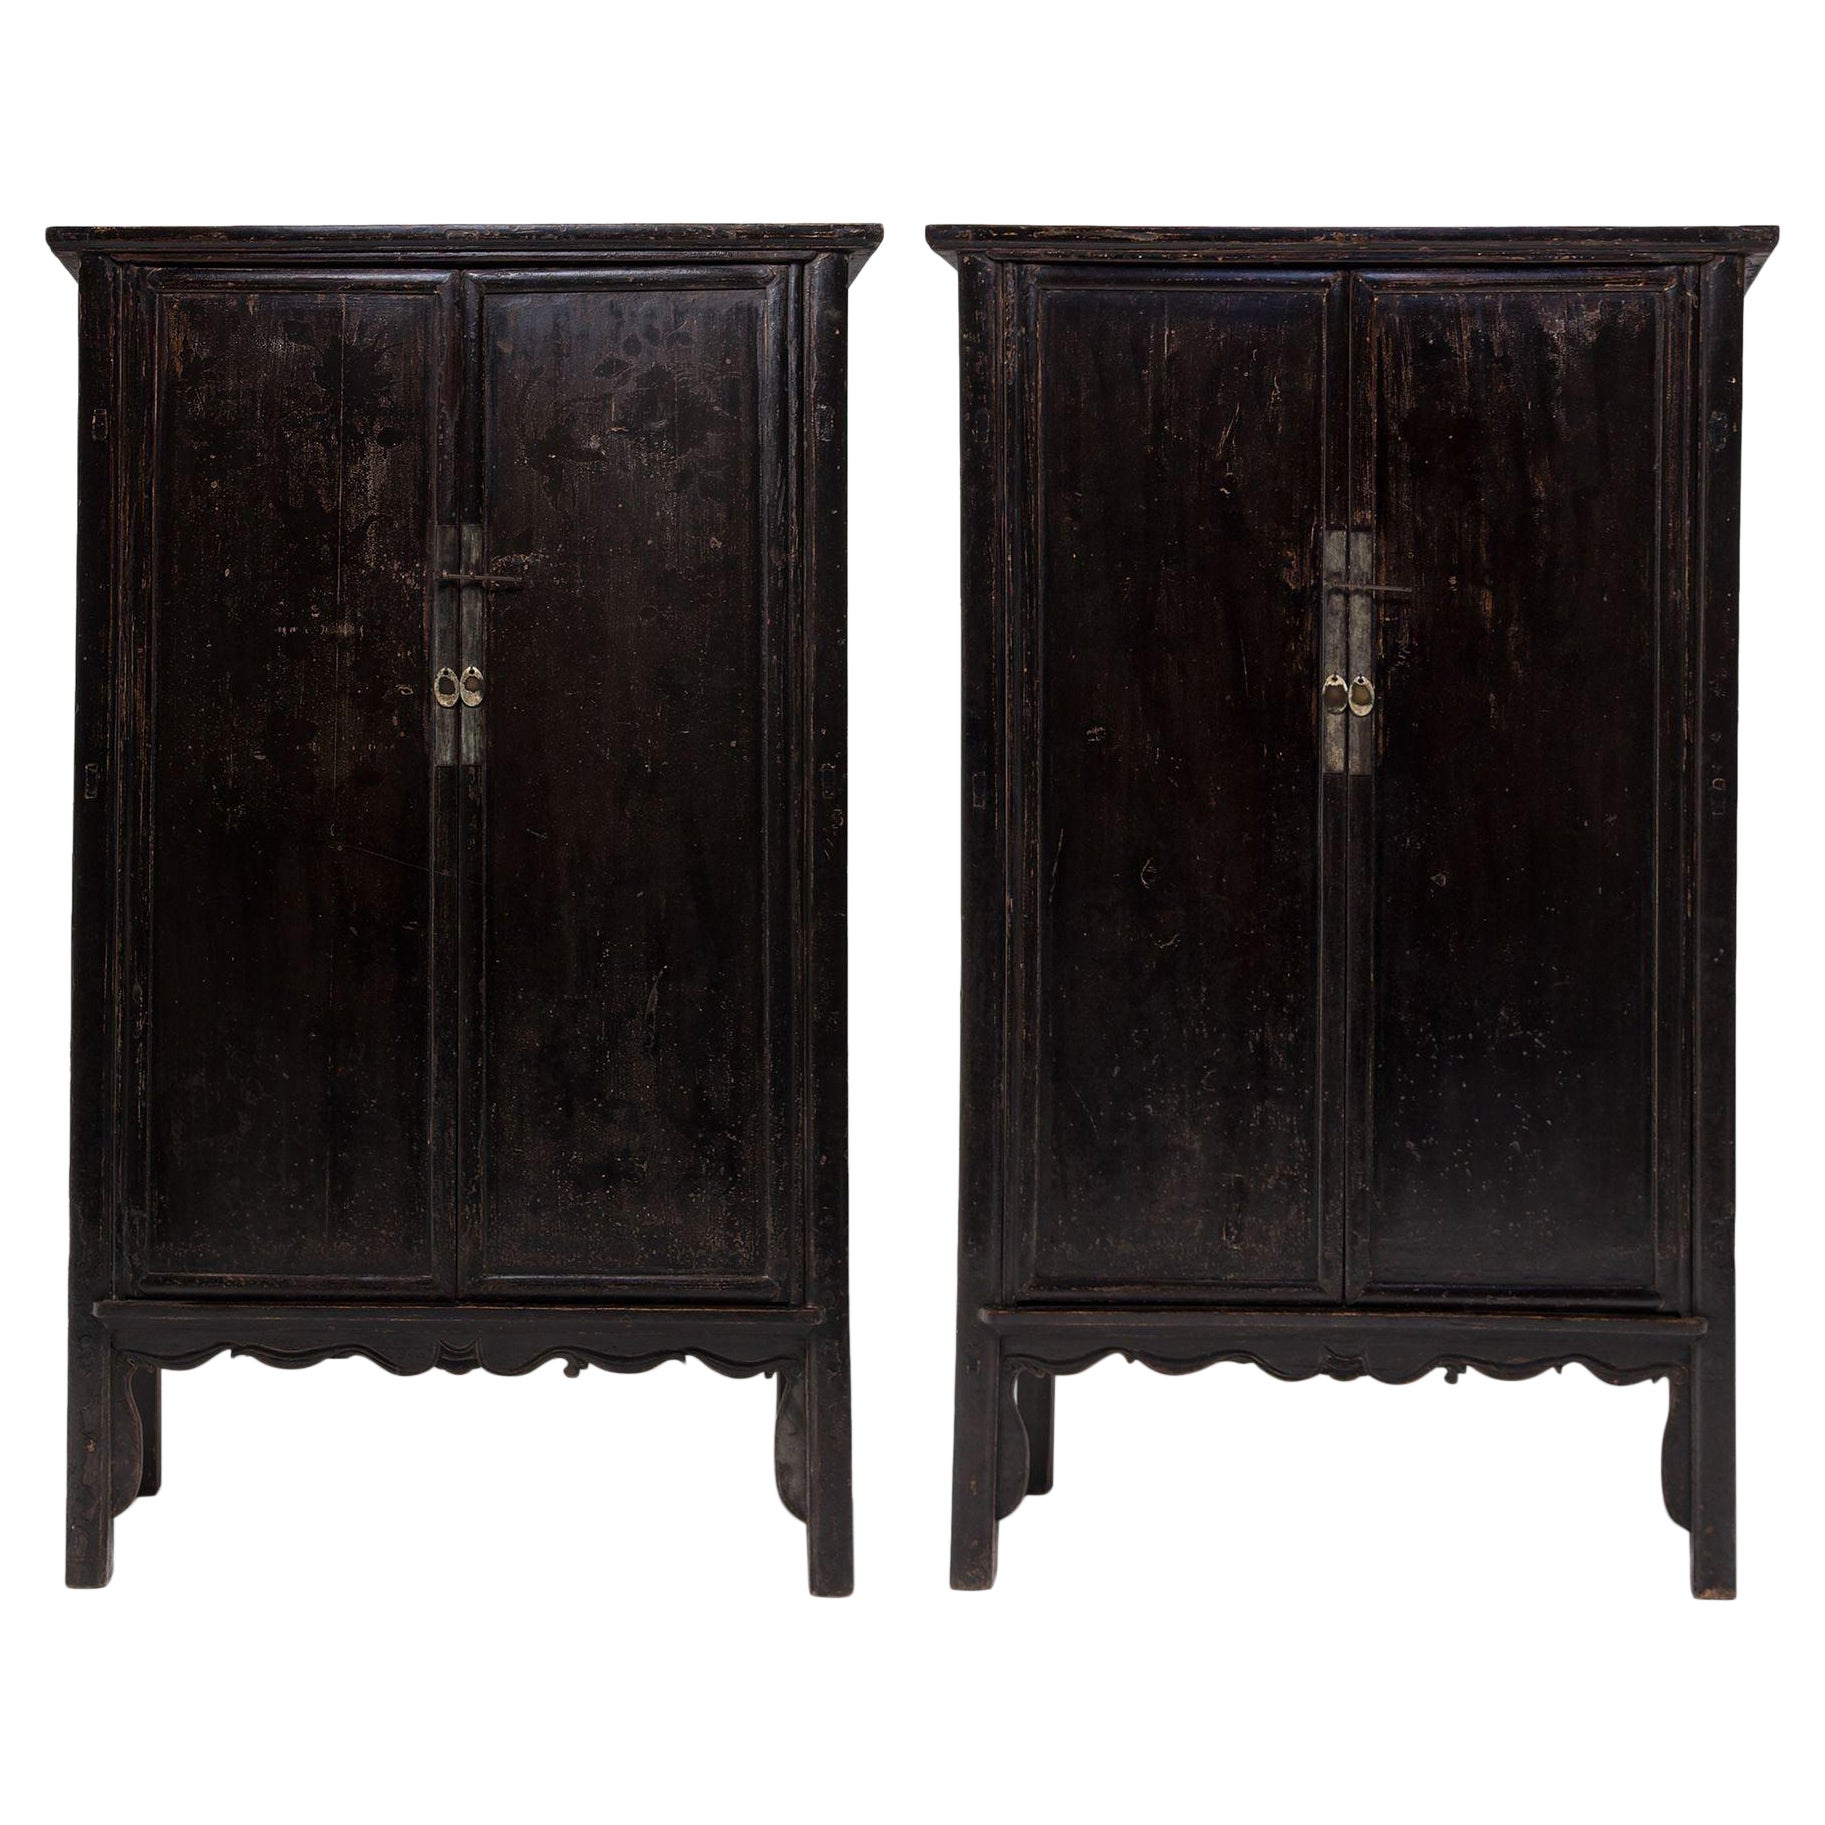 Pair of Black Lacquer Cabinets with Scalloped Aprons For Sale